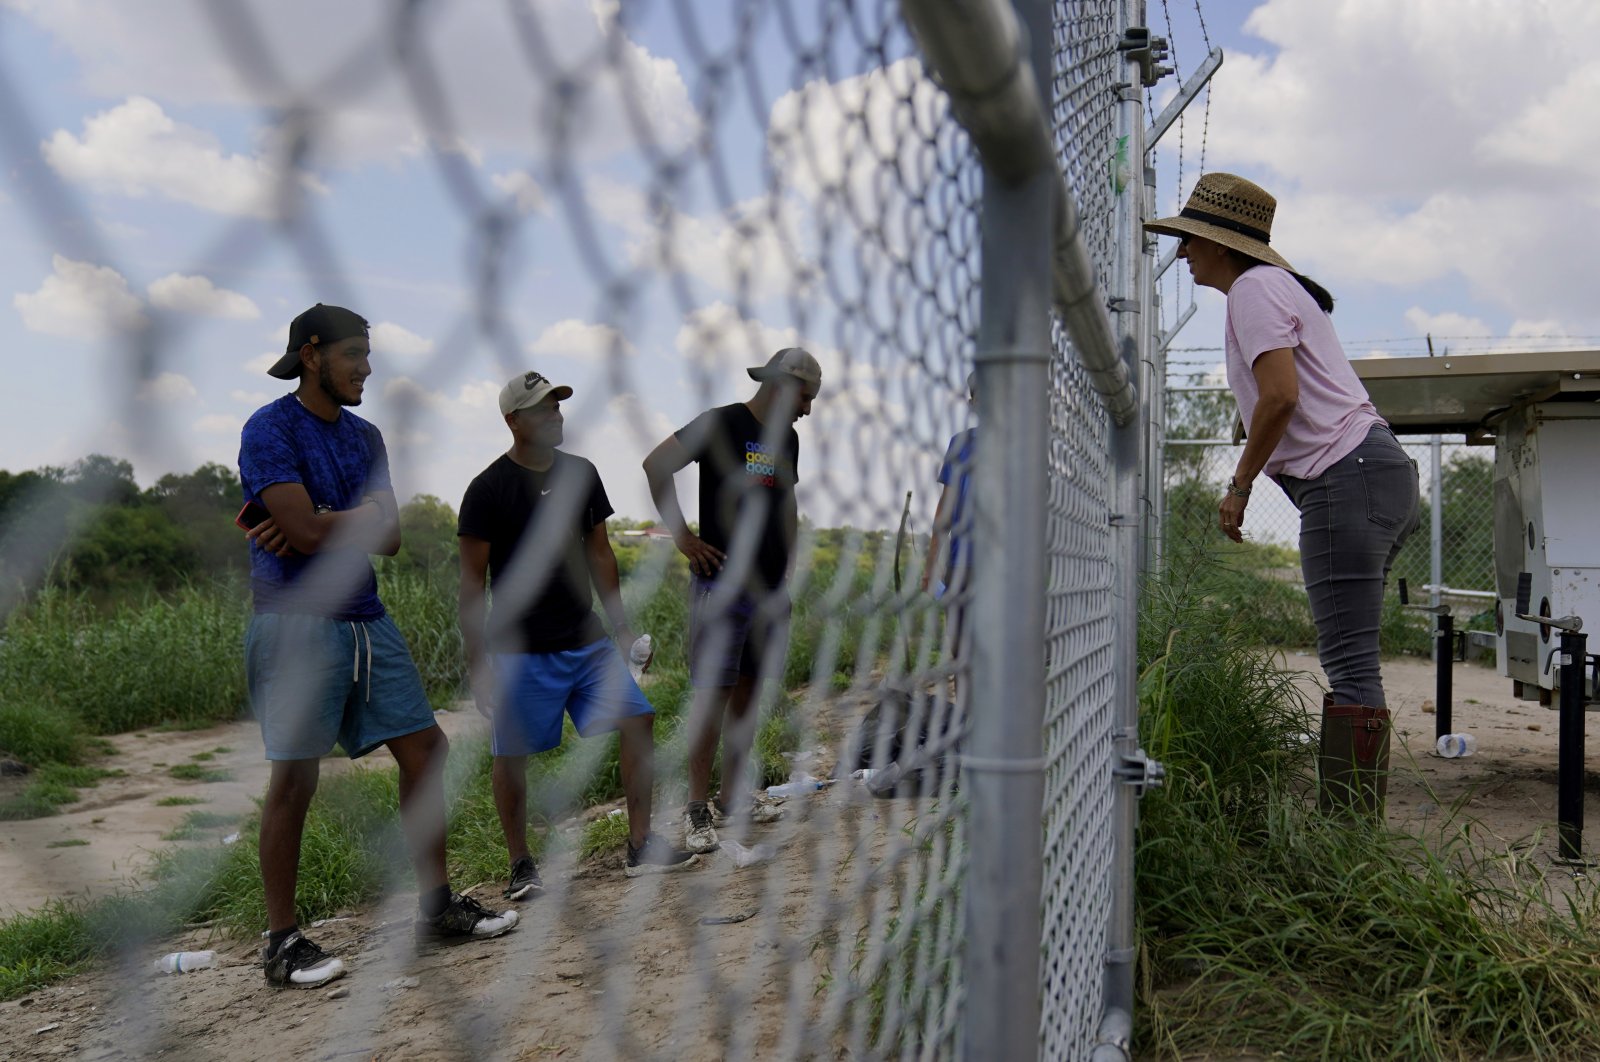 Magali Urbina (R) talks through her fence to migrants who crossed the Rio Grande illegally at her pecan farm, Texas, U.S., Aug. 26, 2022. (AP Photo)